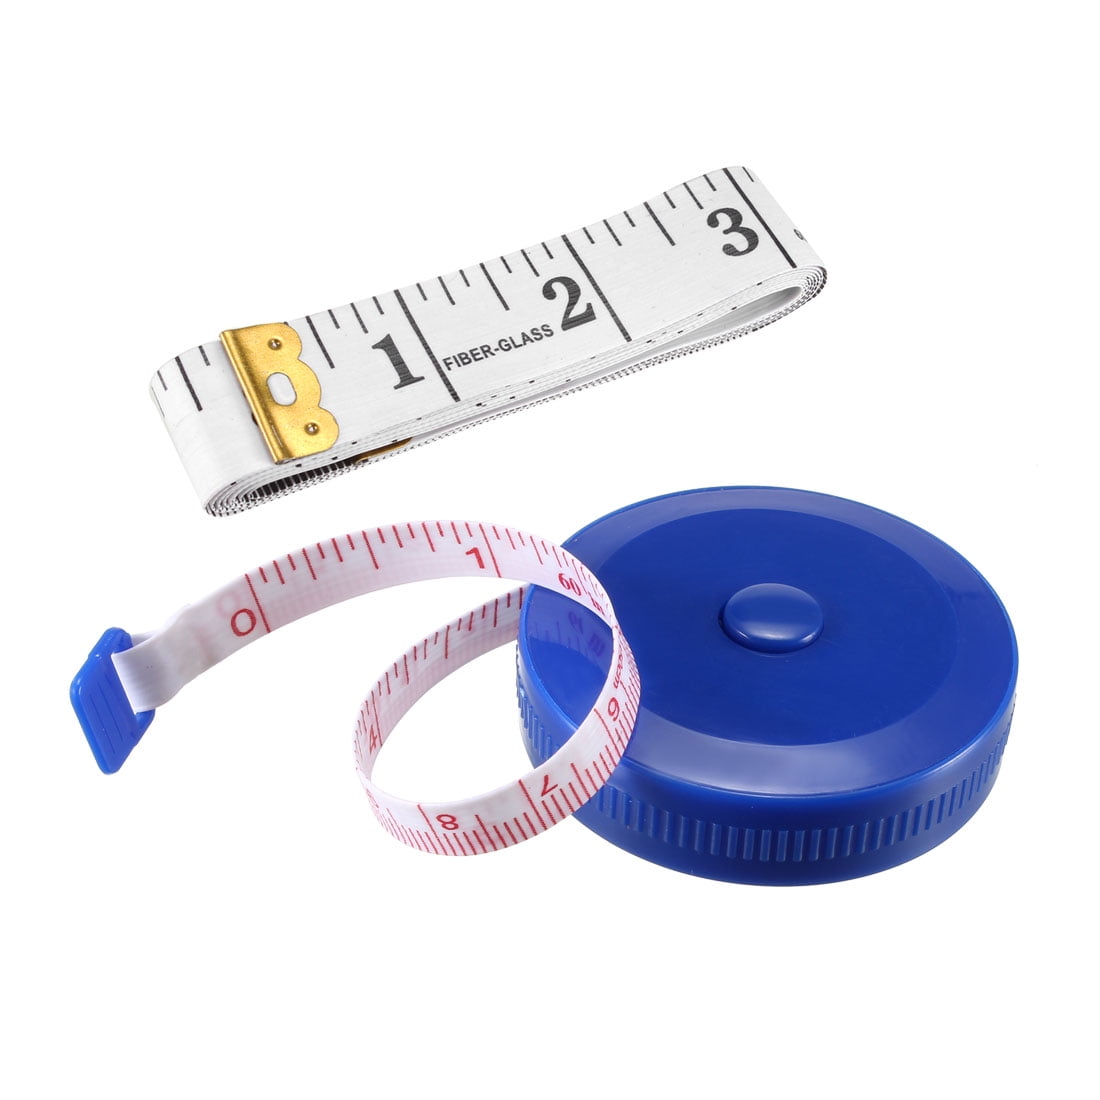 Celkey Tape Measures Retractable Measuring Tape 25 ft with Durable Hollow  Design,Easy-to-Clean Construction,Retractable Mechanism,Stainless Steel Tape